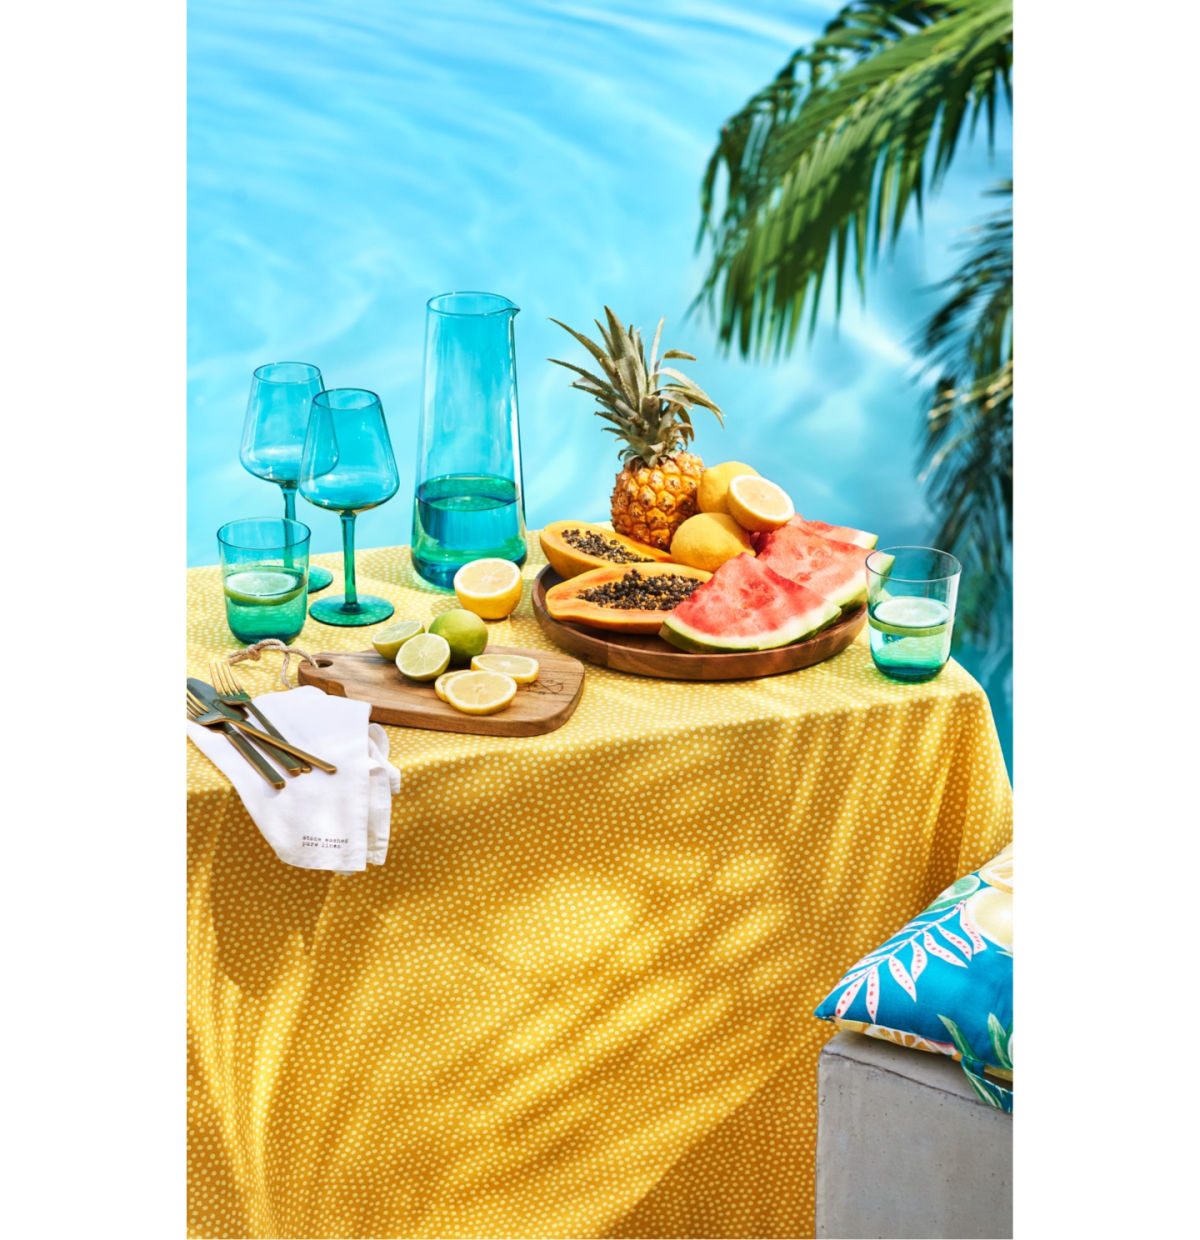 Yellow is very trendy lately, if you combine it with turquoise it creates an amazing summer feeling. These are the colors of sun and water (H&M Home).